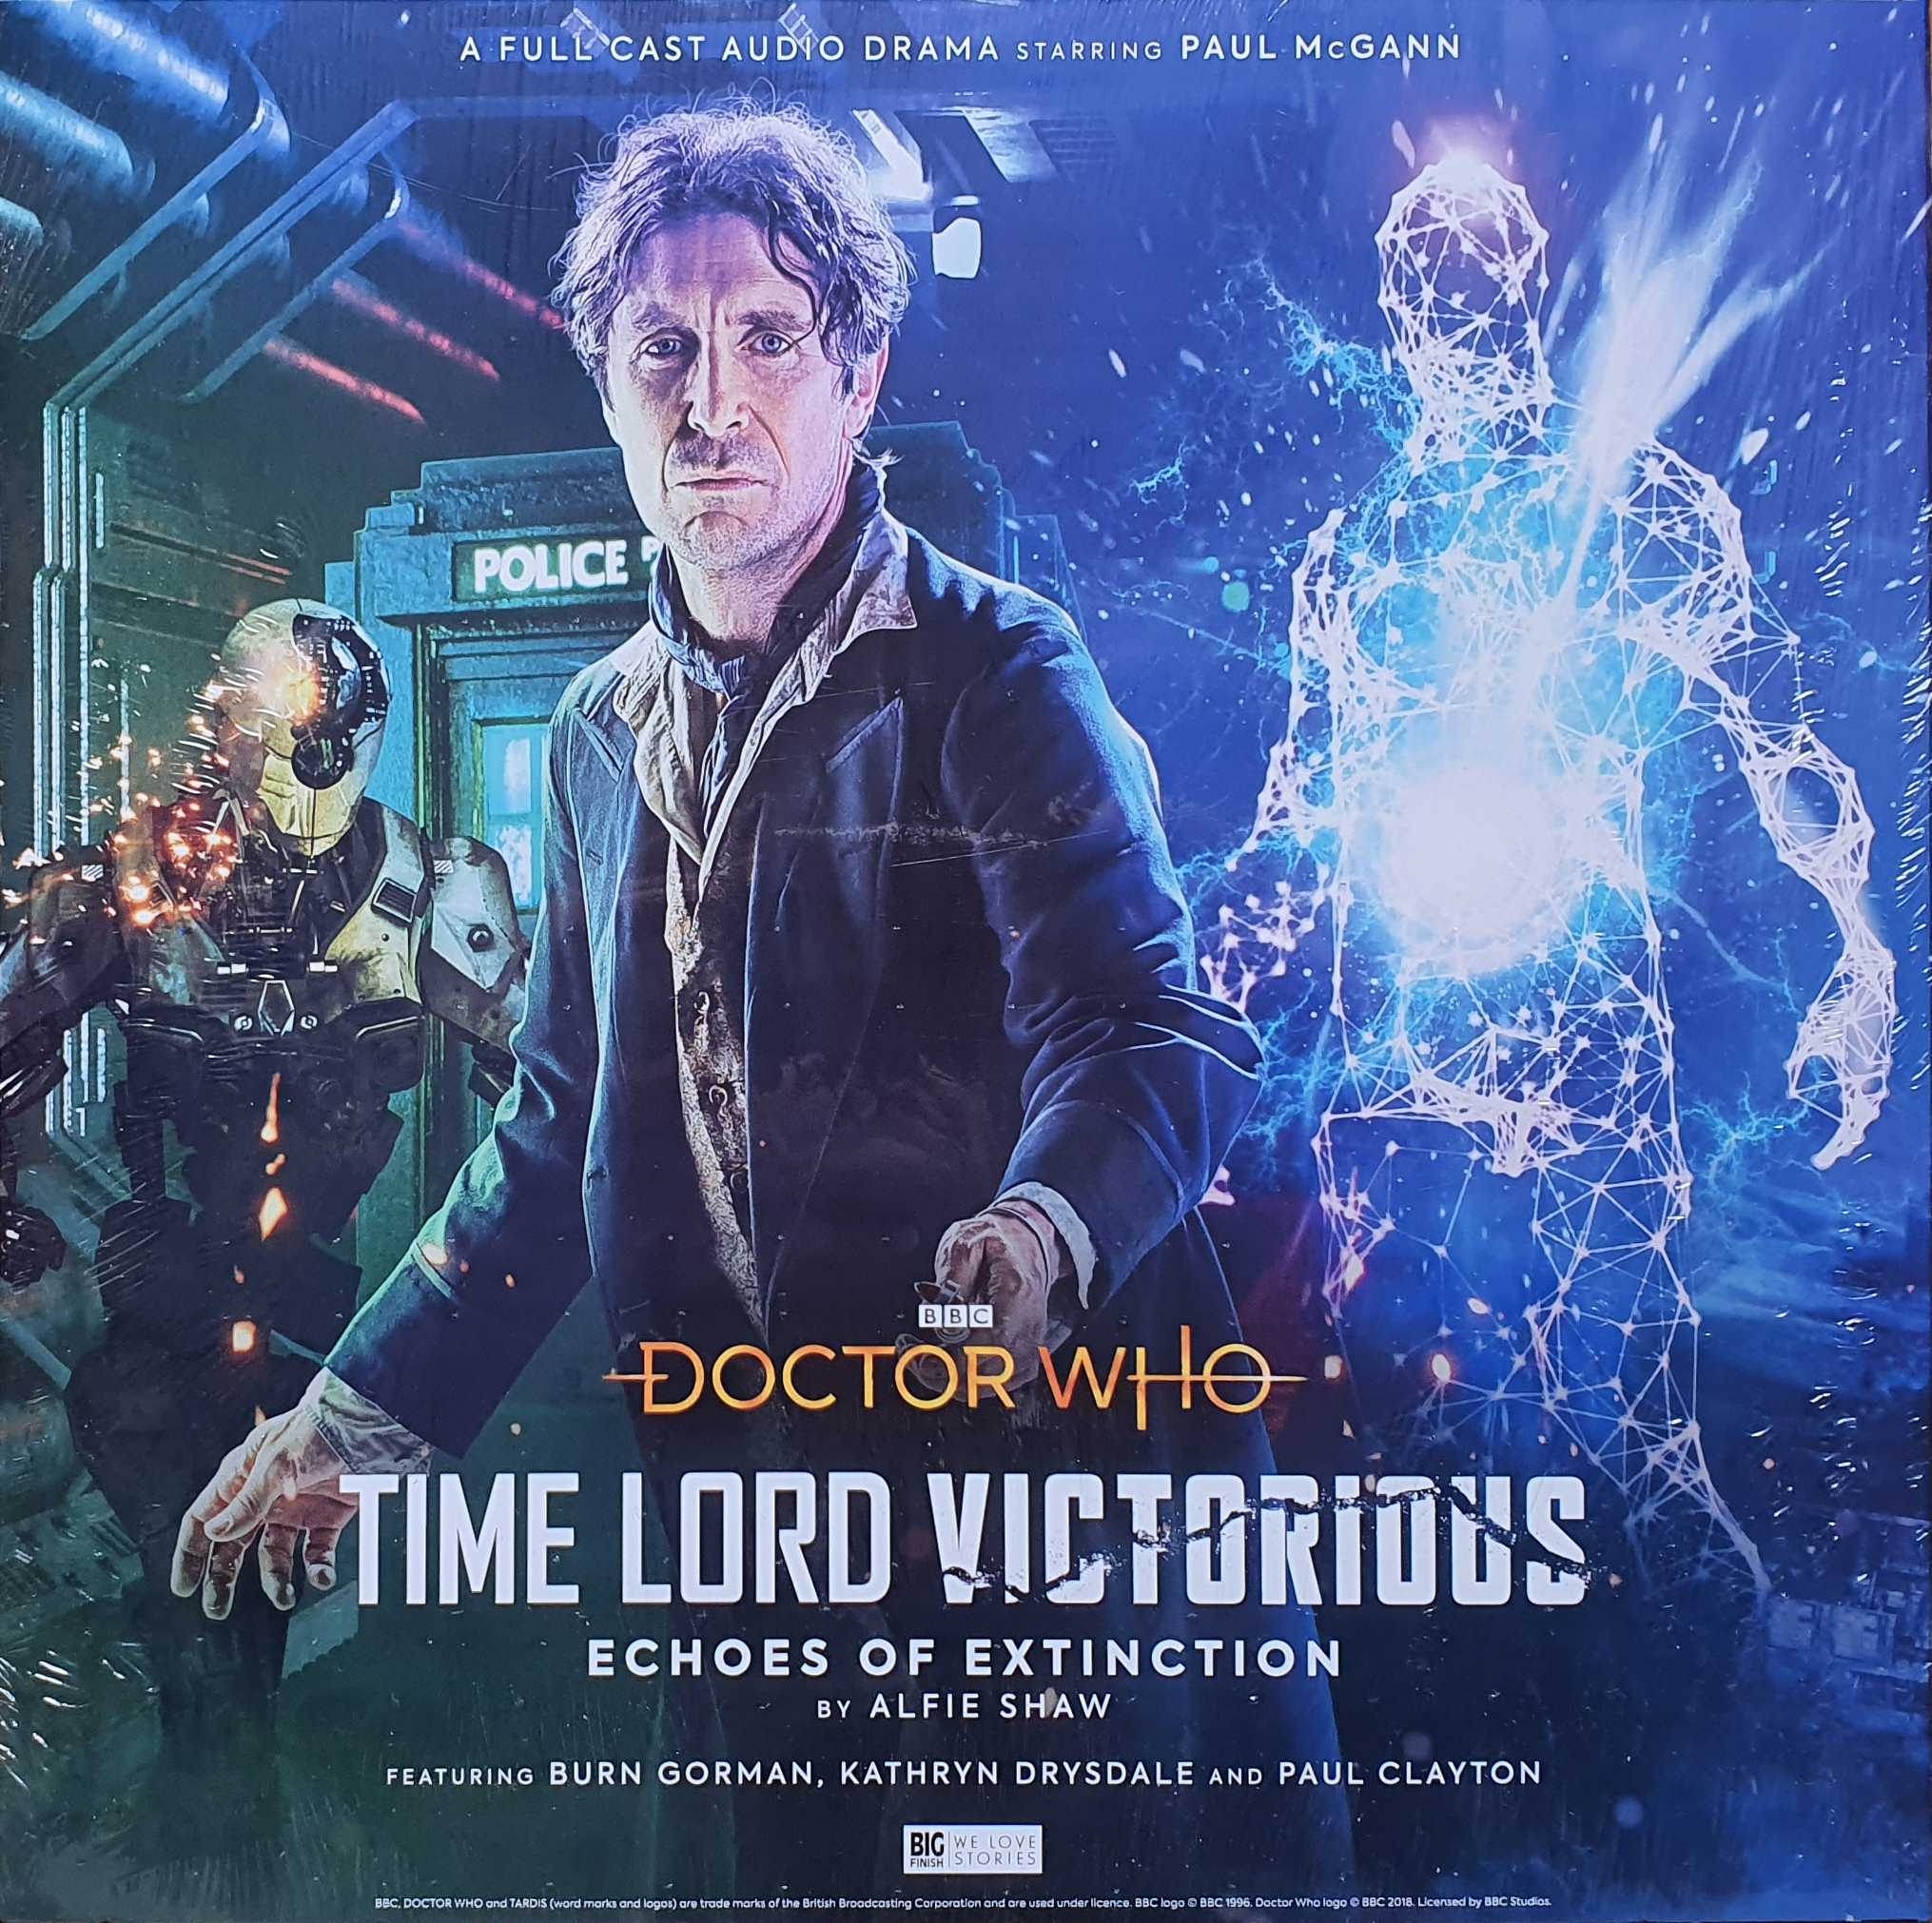 Picture of DEMREC 794 Time Lord victorious - Echoes of extinction by artist Alfie Shaw from the BBC records and Tapes library